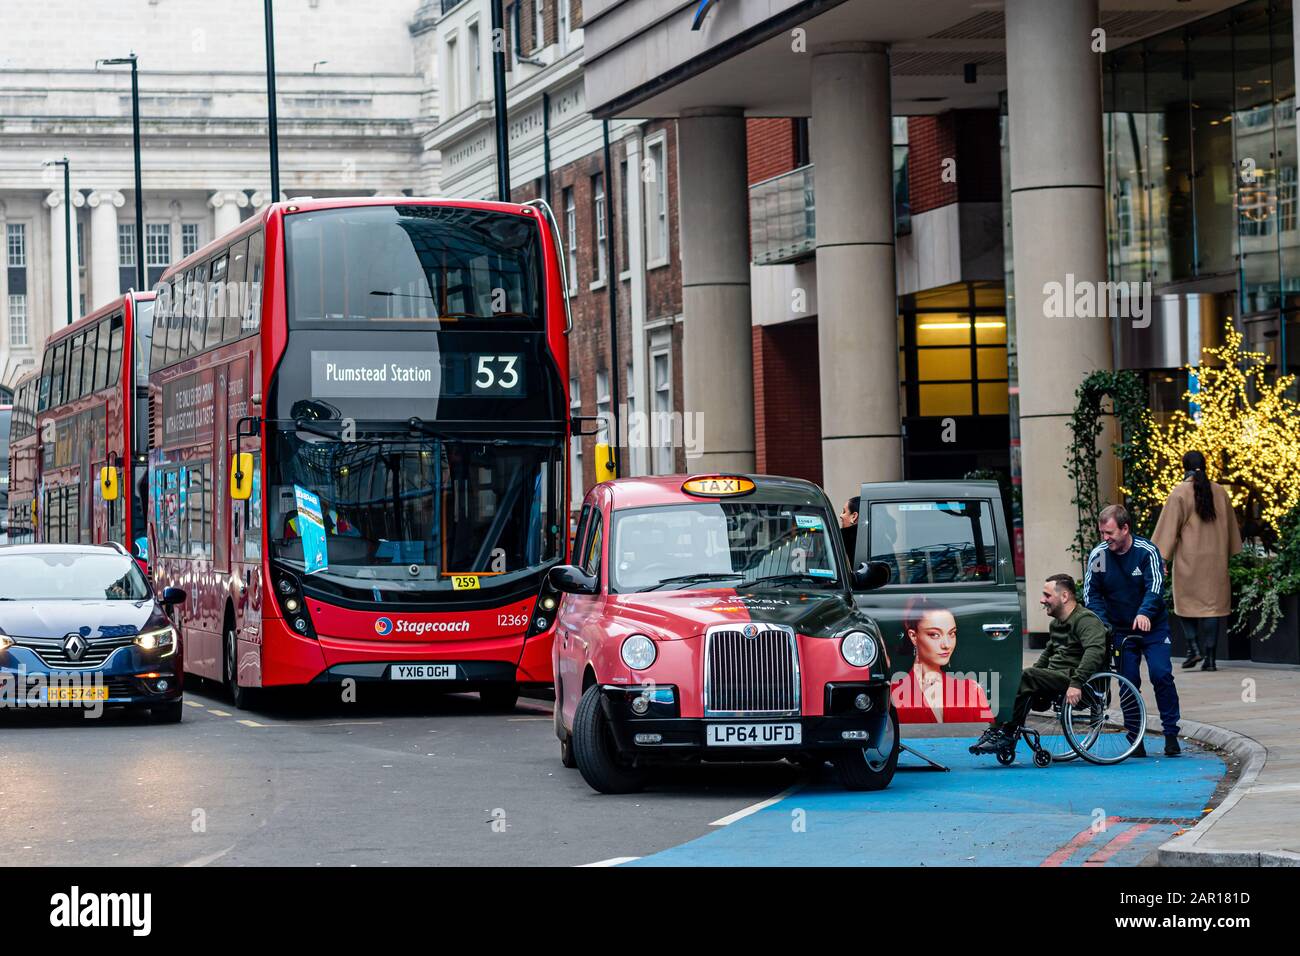 London, UK - January 1, 2020: A taxi driver helps a person with a wheelchair get in a taxi Stock Photo